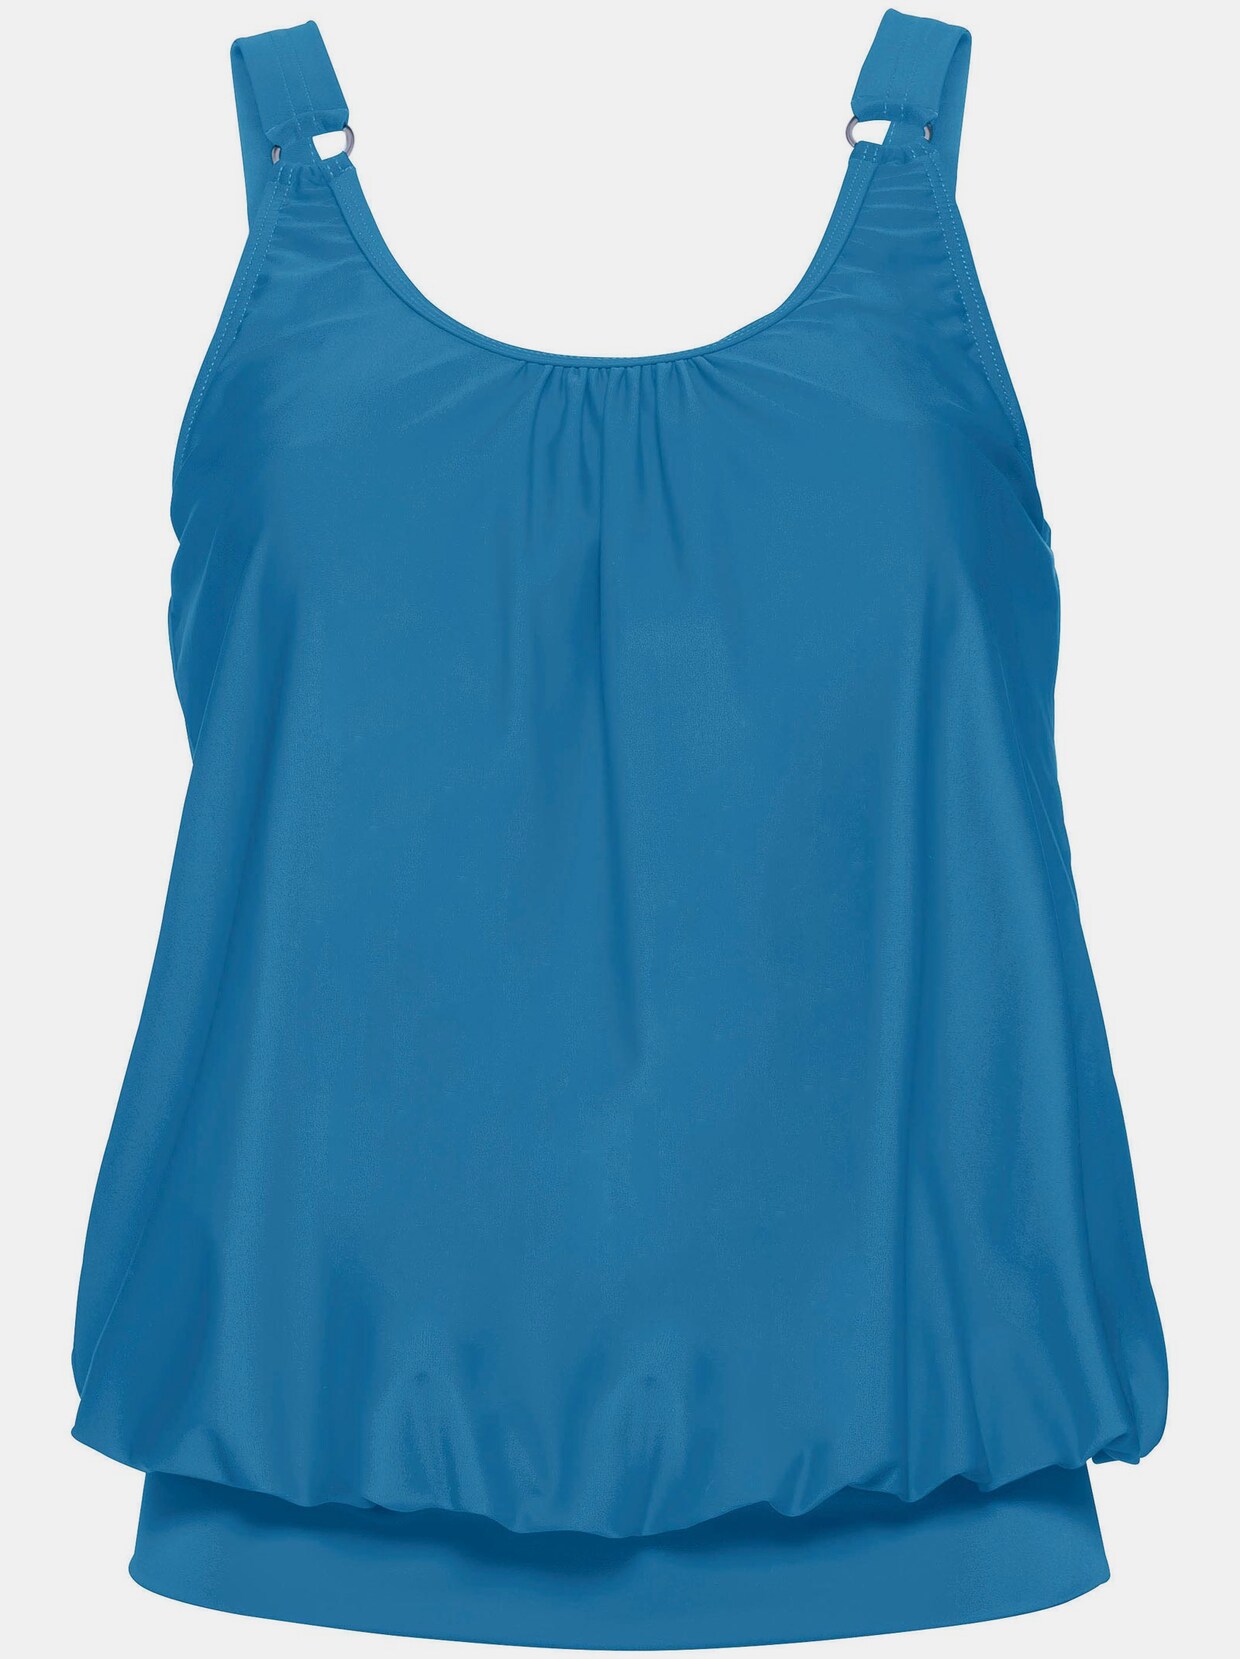 Tankini a linie - Der absolute TOP-Favorit 